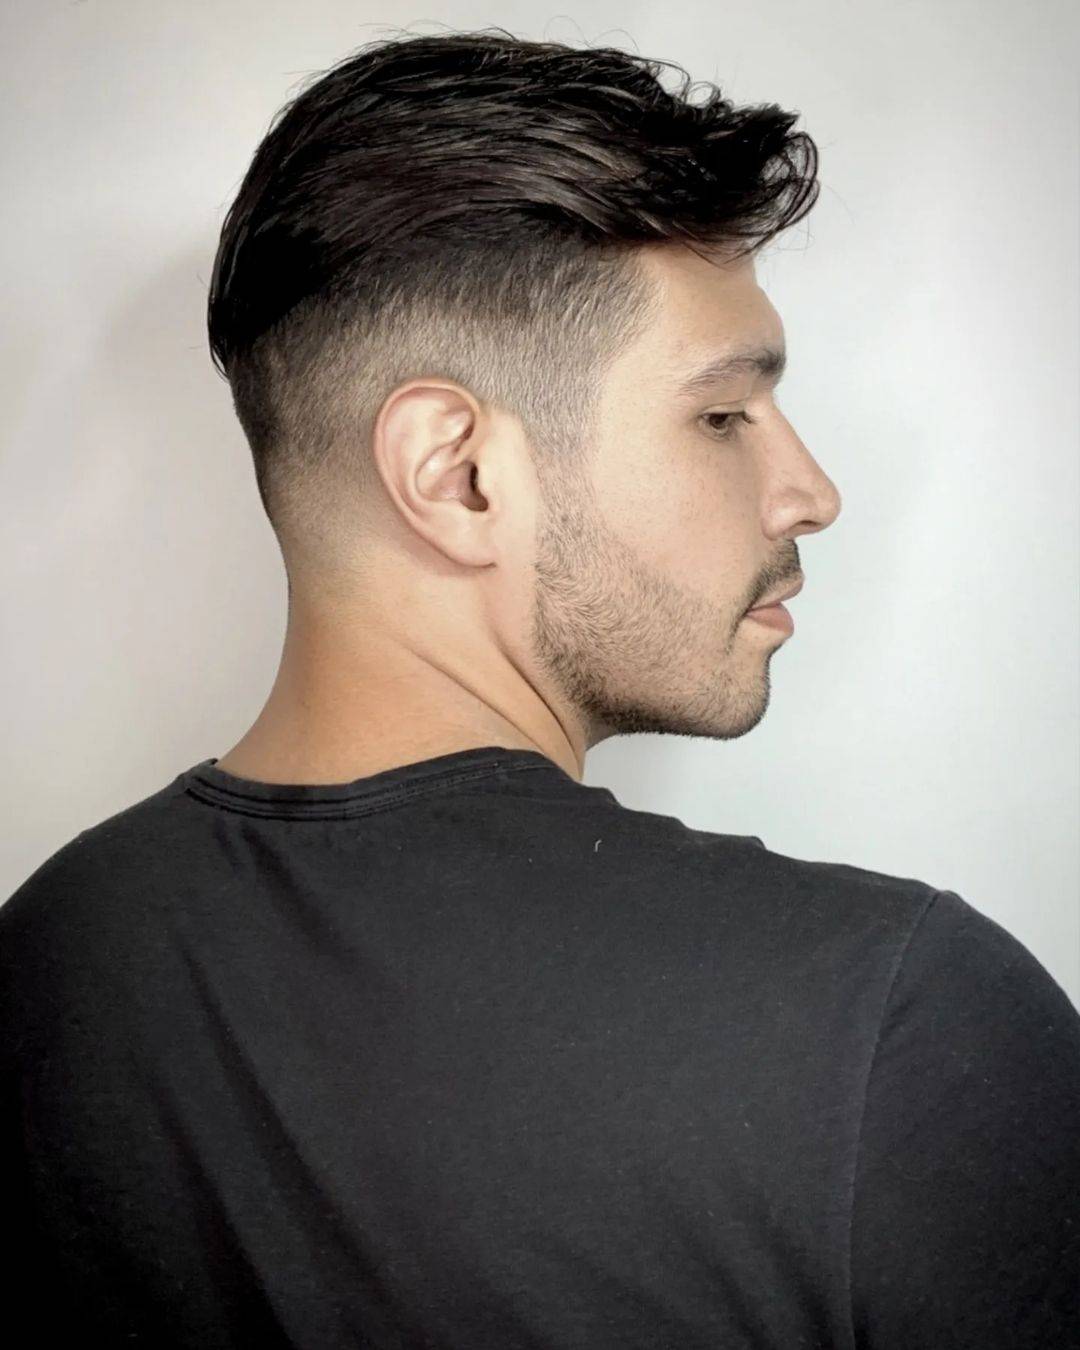 Hairstyle for Men 243 best haircut for men | haircut for men | haircuts for men Haircut for Men